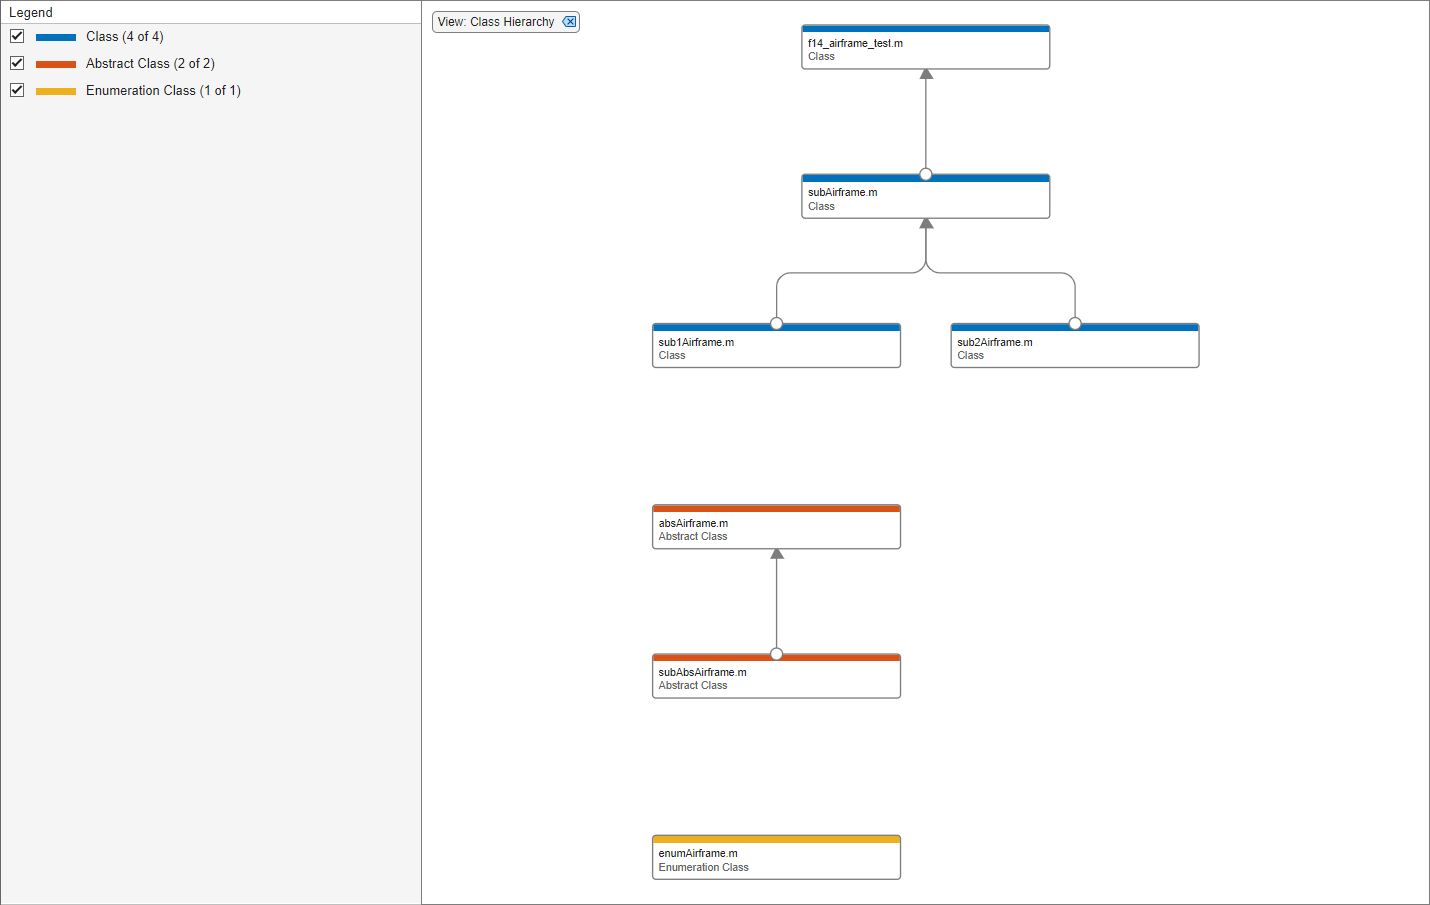 Dependency graph with Class Hierarchy filter applied. On the left, the Legend panel displays how many files of each class hierarchy type are present the graph.